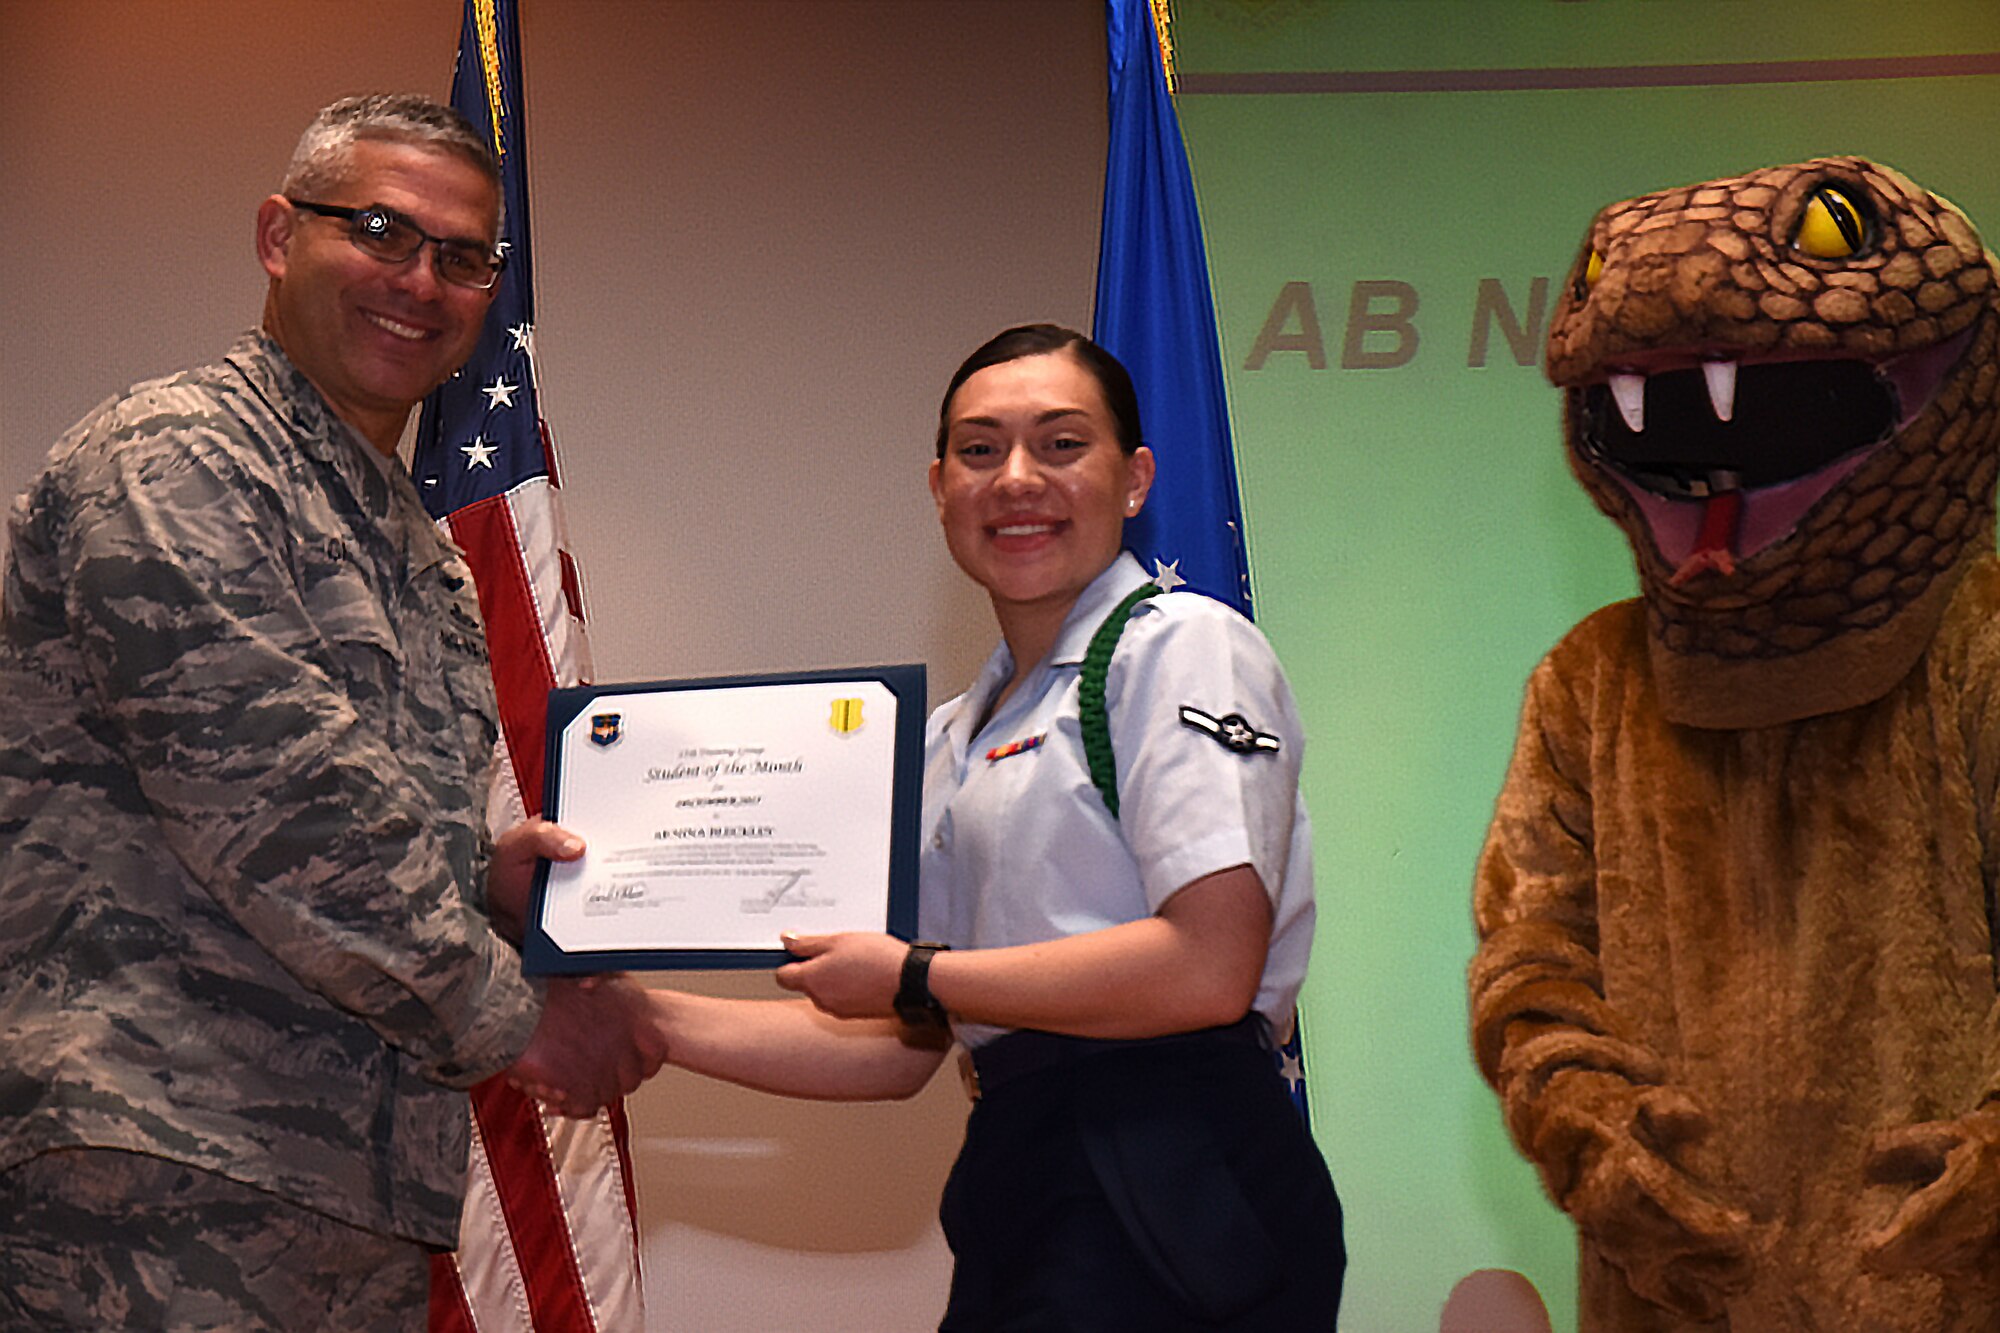 U.S. Air Force Col. Alex Ganster, 17th Training Group commander, presents the 315th Training Squadron Student of the Month award for Dec. 2017 to Airman Nina Bleckley, 315th TRS trainee, in the base theater on Goodfellow Air Force Base, Texas, Jan. 5, 2018. The 315th Training Squadron’s vision is to develop combat-ready intelligence, surveillance and reconnaissance professionals and promote an innovative squadron culture and identity unmatched across the United States Air Force. (U.S. Air Force photo by Airman 1st Class Seraiah Hines/Released)